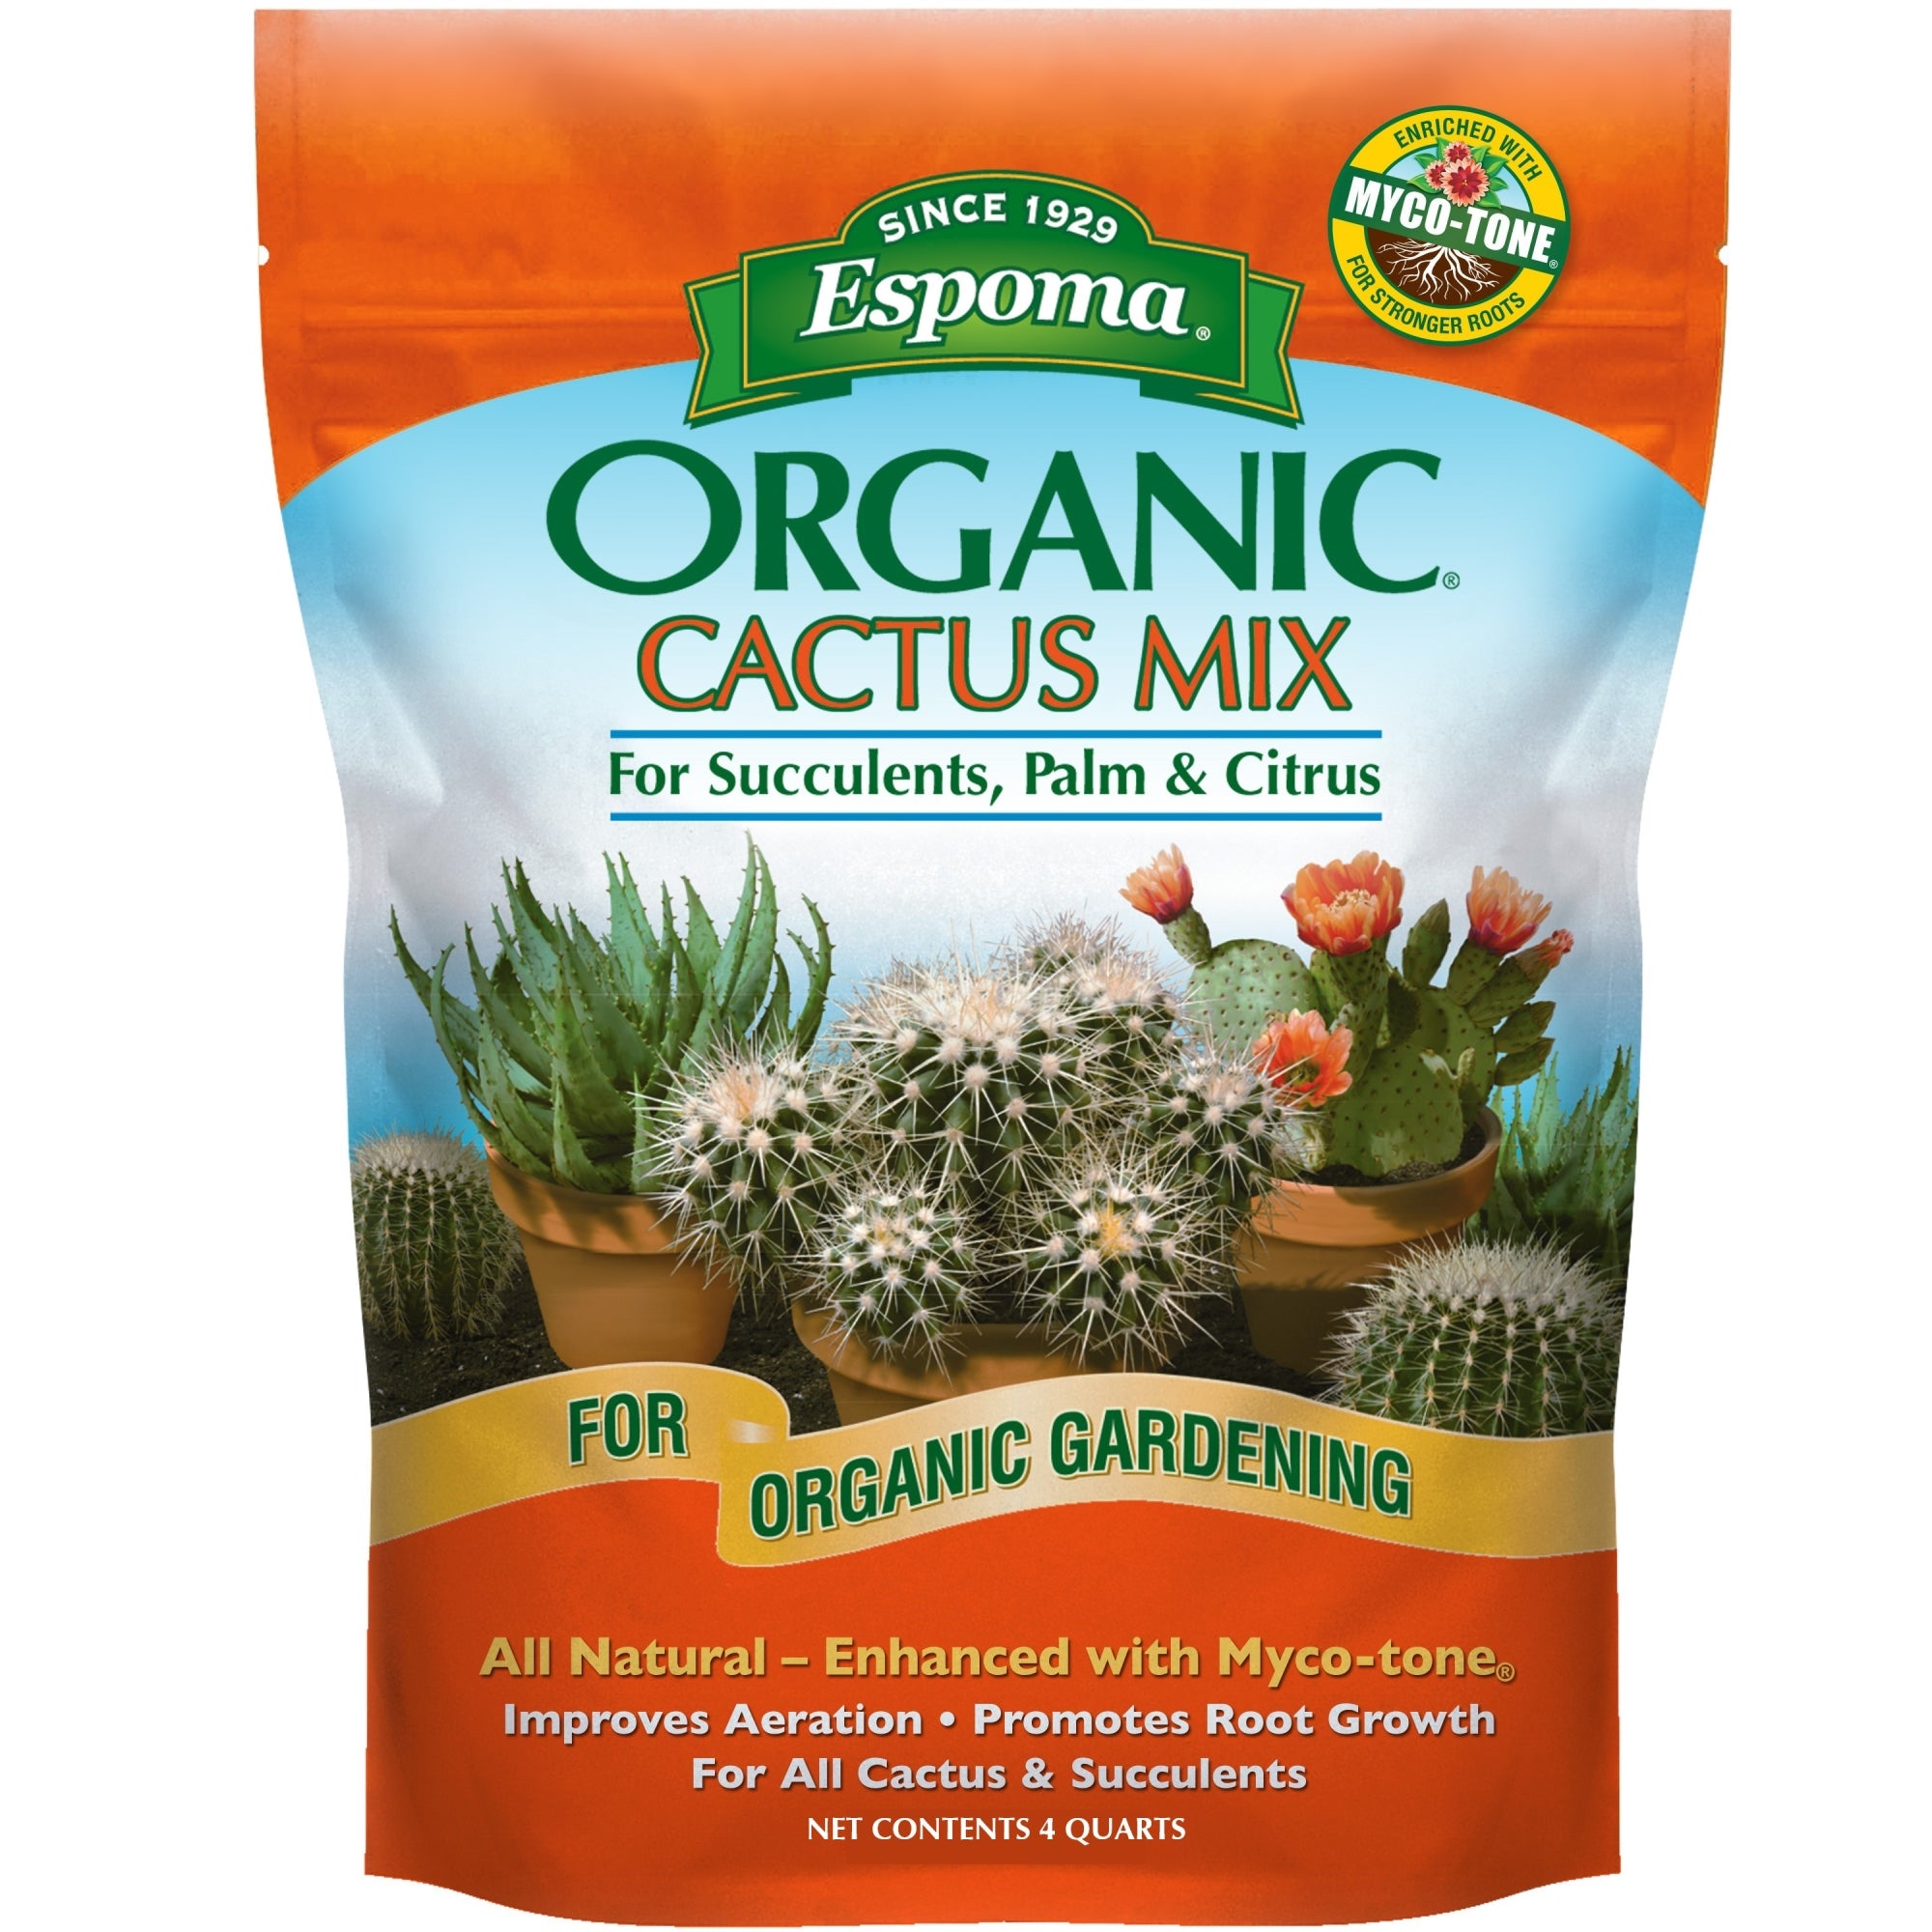 Espoma Organic Cactus Potting Soil Mix for Succulents, Palms & Citrus, for Organic Gardening, All Natural with Mycro-tone, Improves Aeration & Promotes Root Growth